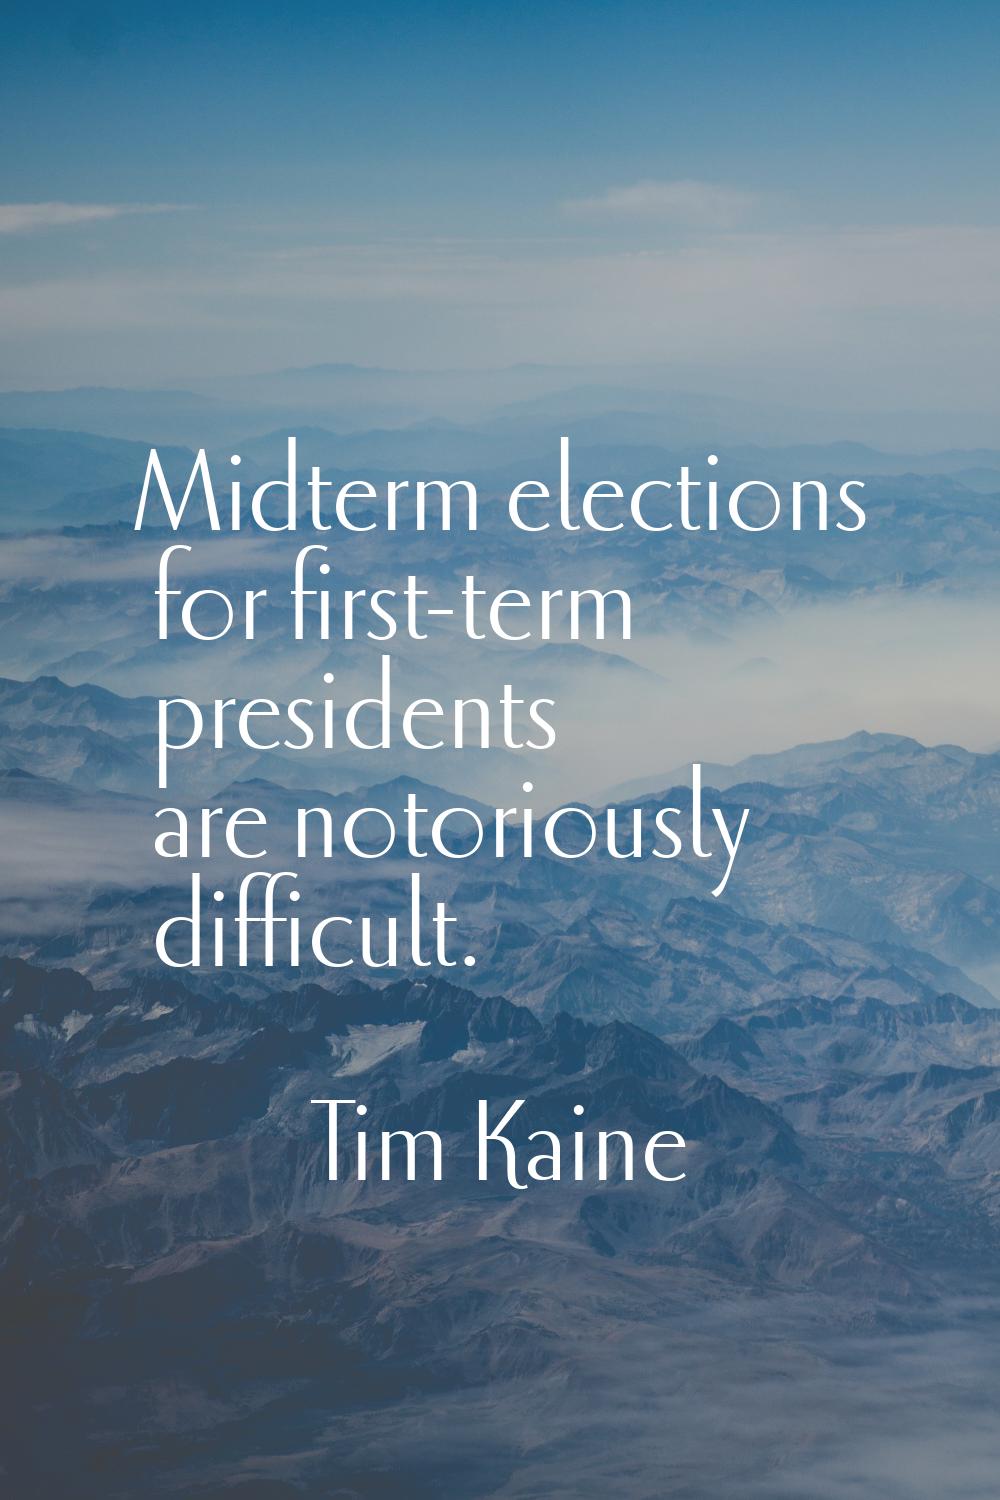 Midterm elections for first-term presidents are notoriously difficult.